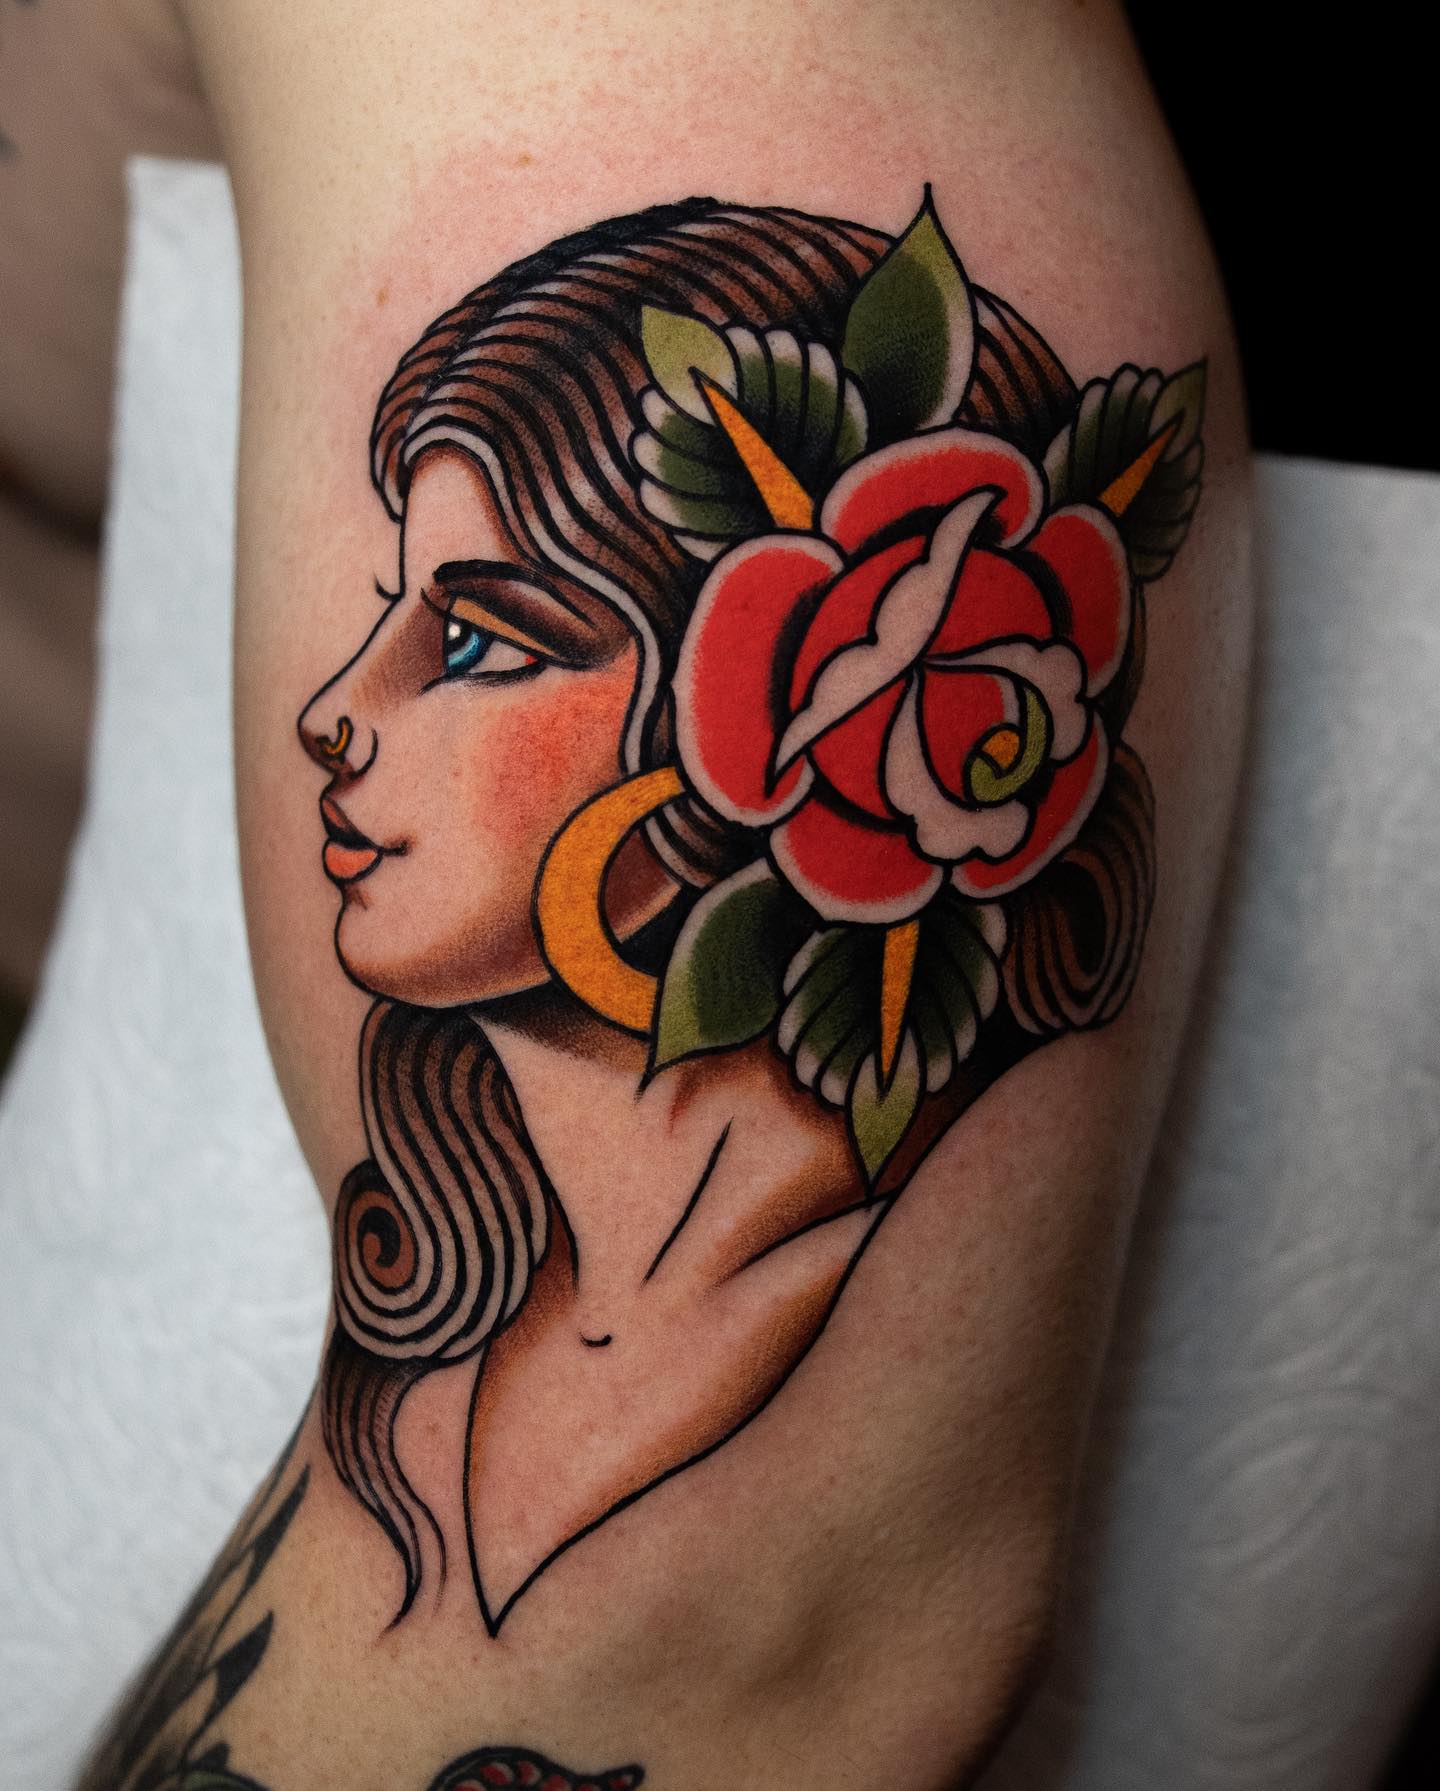 Gypsy with Red Rose Tattoo on Arm